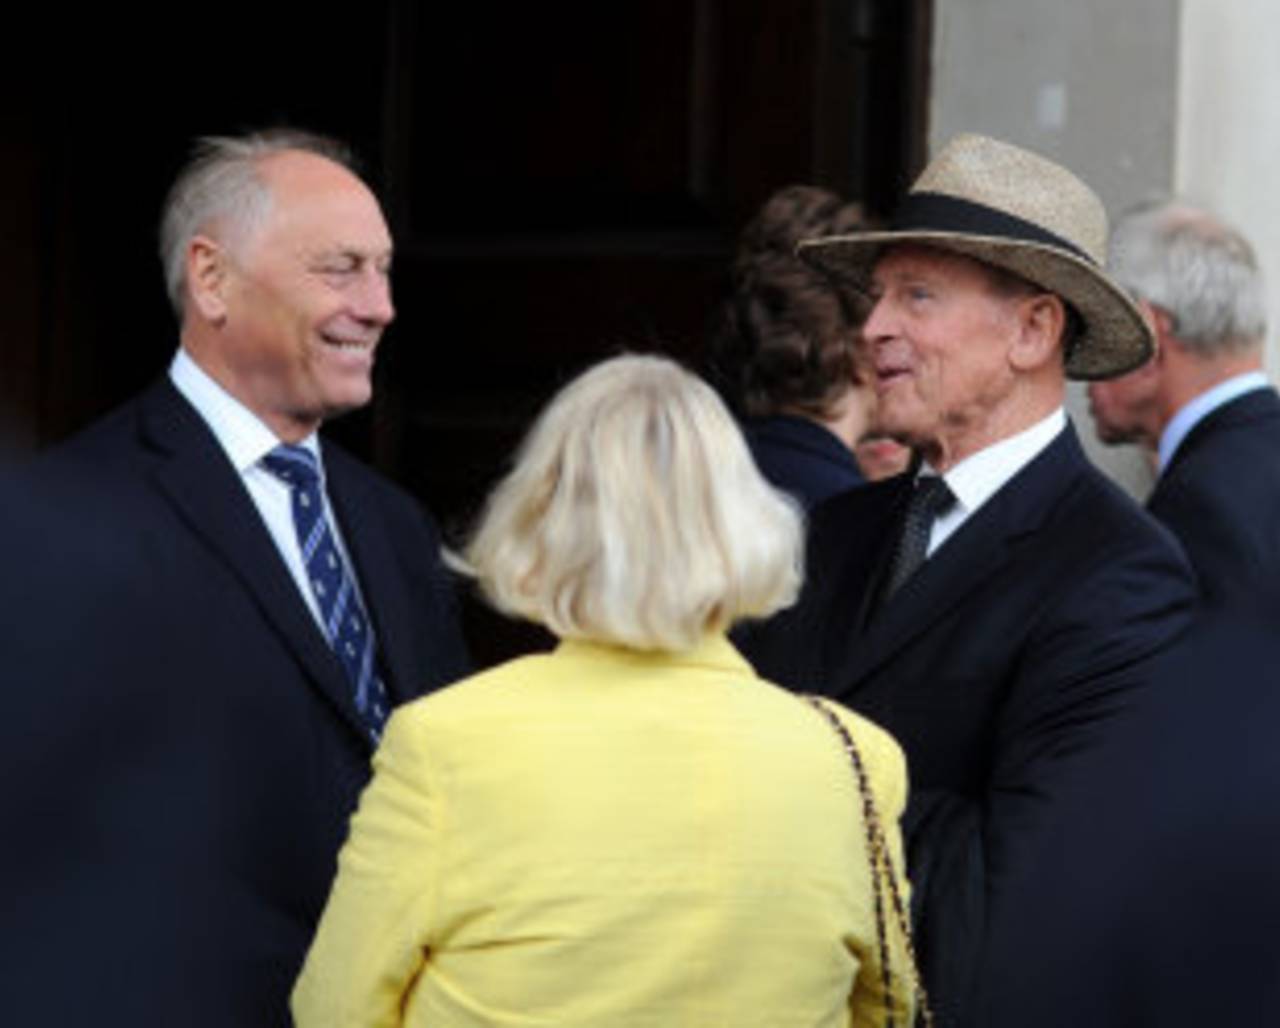 Yorkshire chairman Colin Graves and Geoffrey Boycott were among those present at Tony Greig's memorial service&nbsp;&nbsp;&bull;&nbsp;&nbsp;Getty Images